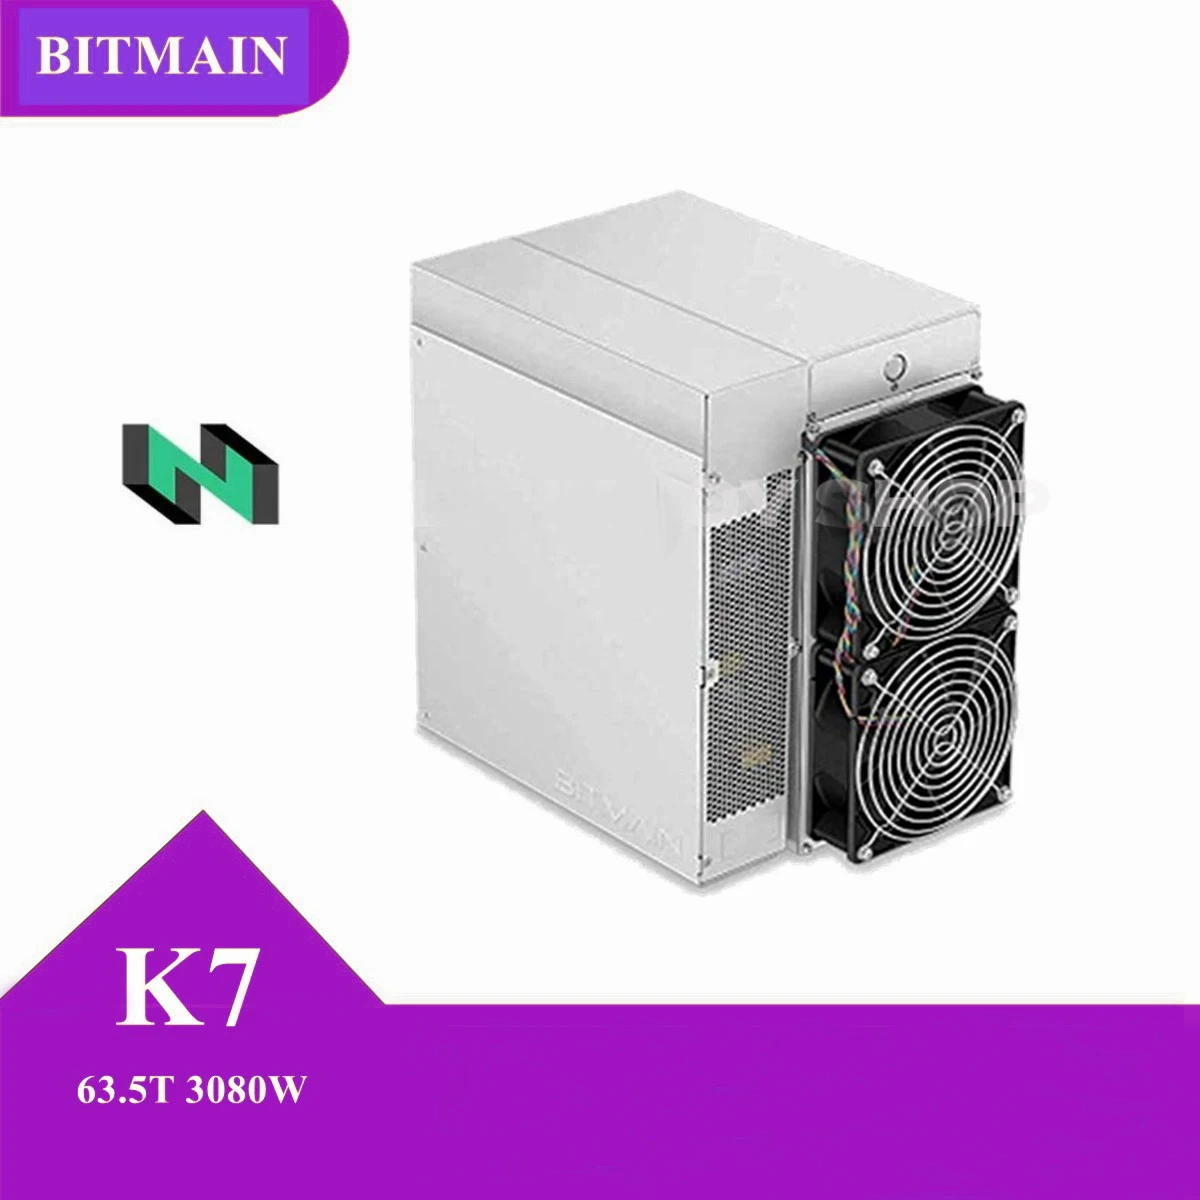 K7 Antminer CKB Miner 63.5T with 3080W Eaglesong Mining Hardware Crypto Miner From Bitmain